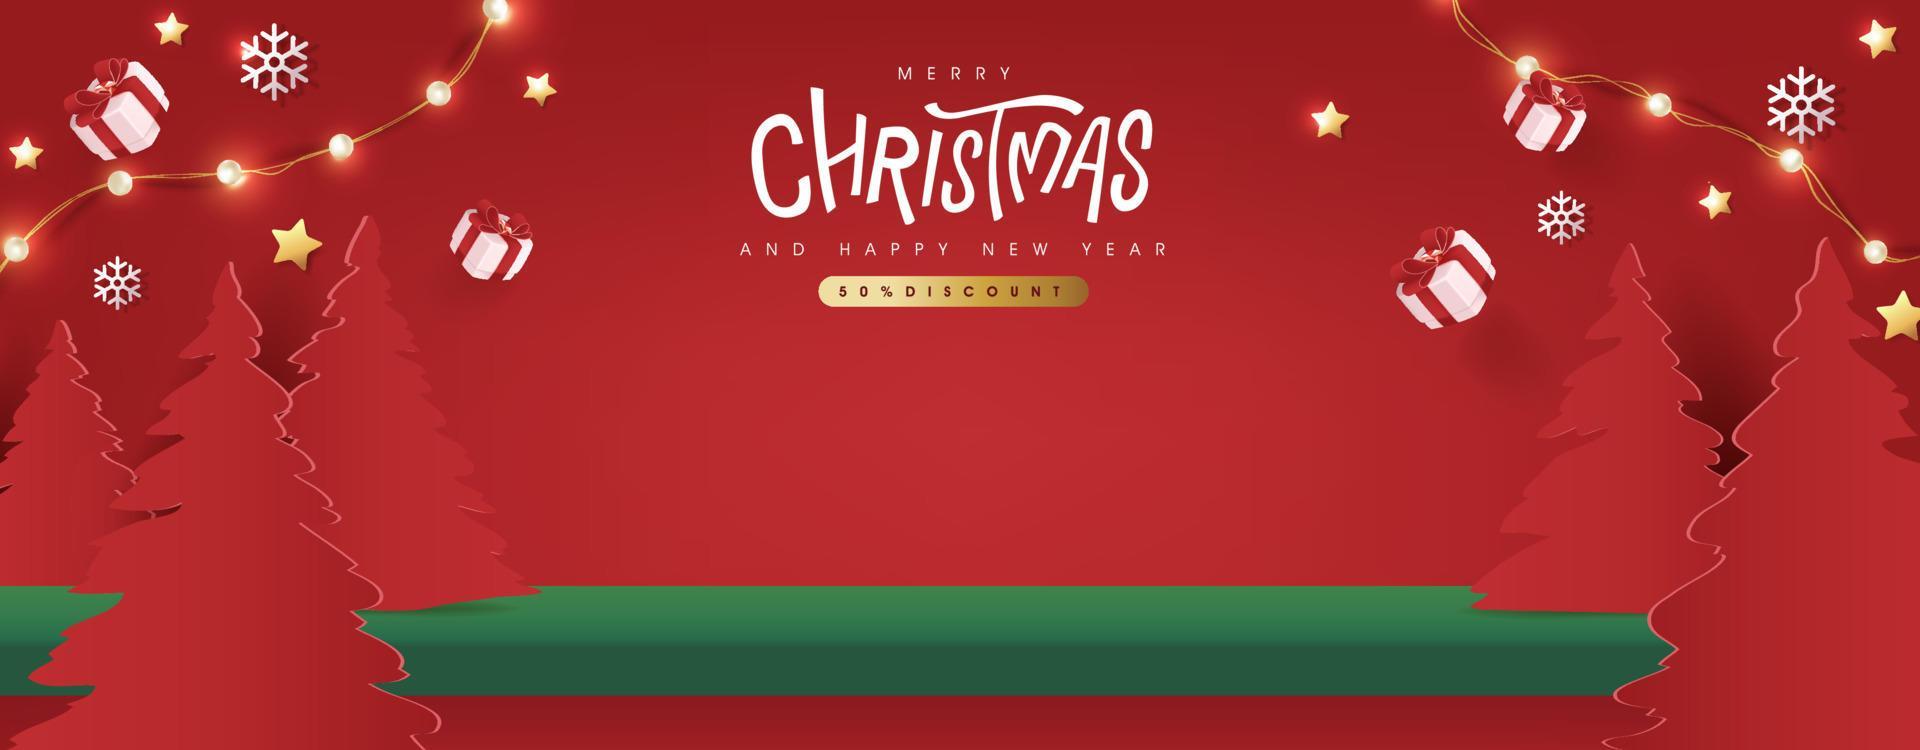 Merry Christmas banner studio table room product display copy space ...